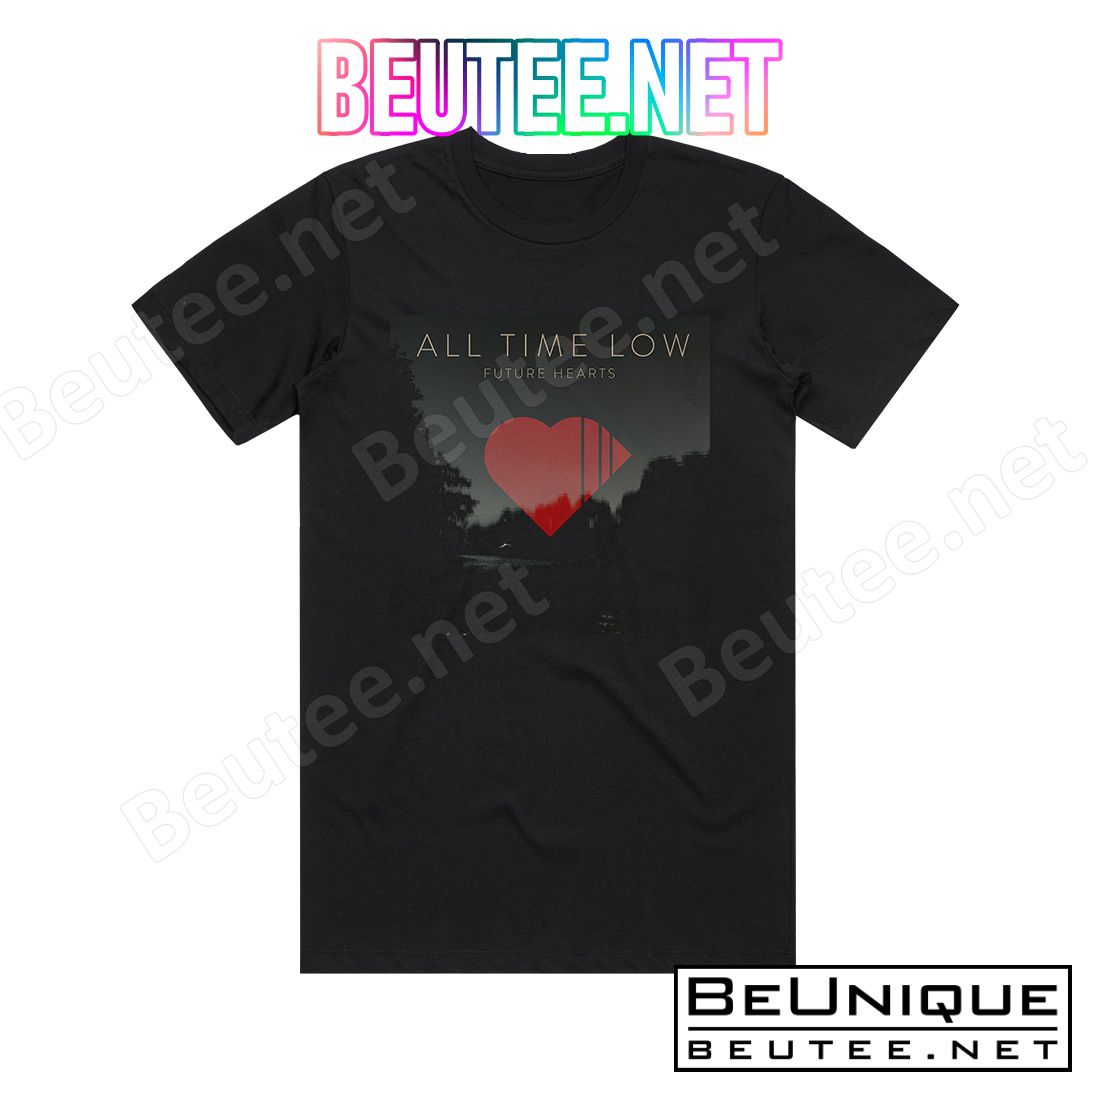 All Time Low Future Hearts 2 Album Cover T-Shirt